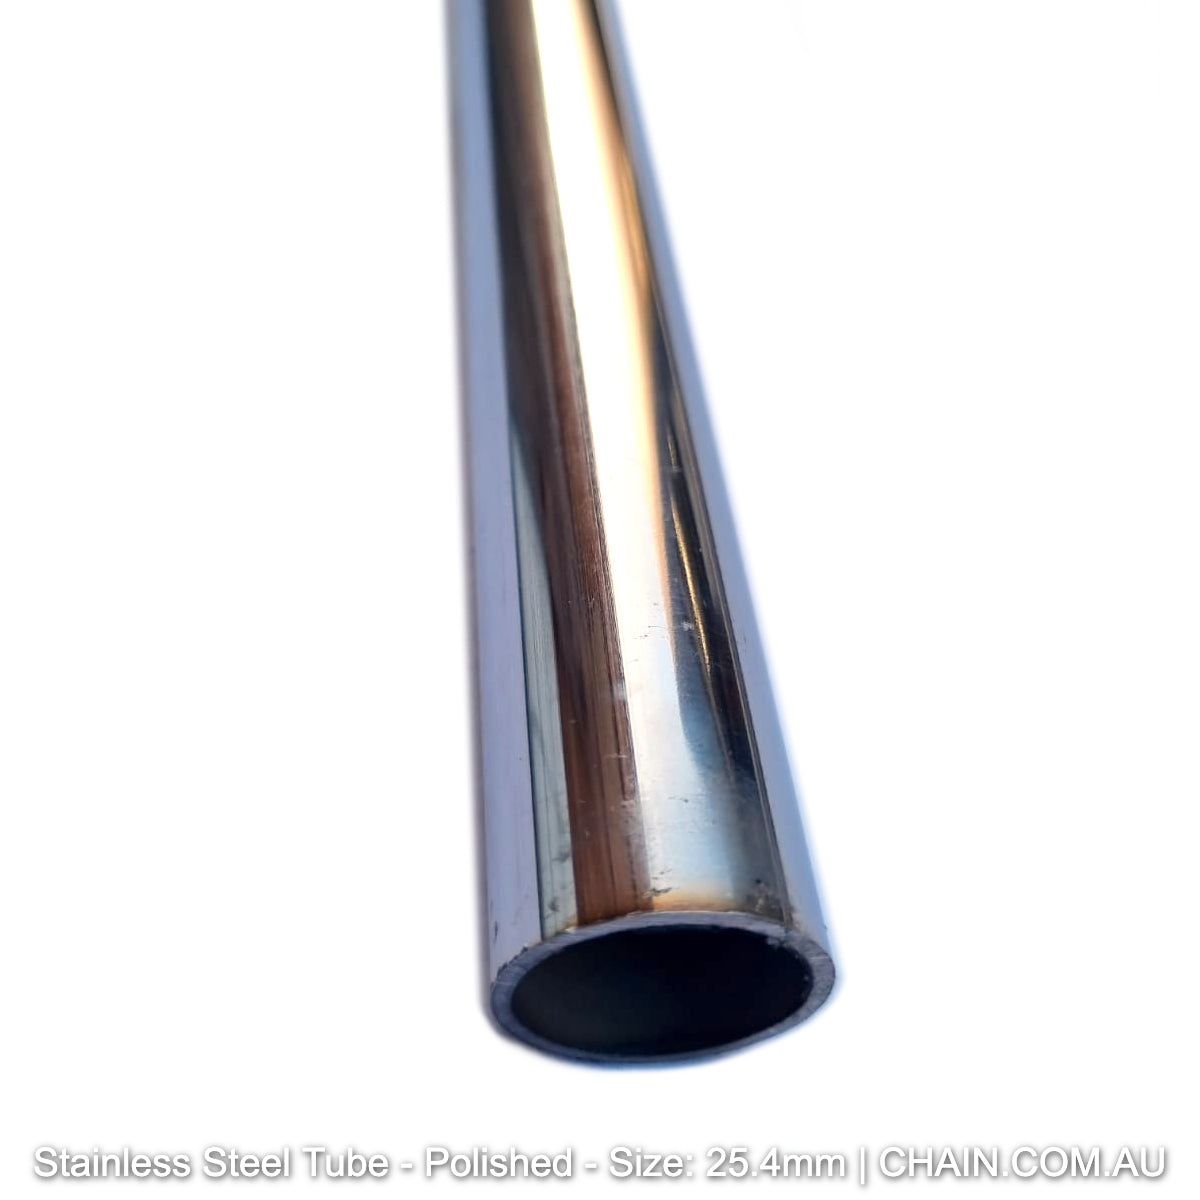 Stainless steel tube in a polished finish. Size: 25.4mm outside diameter.  Thickness: 1.5mm. Material: Type 316 or 304 Stainless Steel. Australia wide shipping & Melbourne pick up.